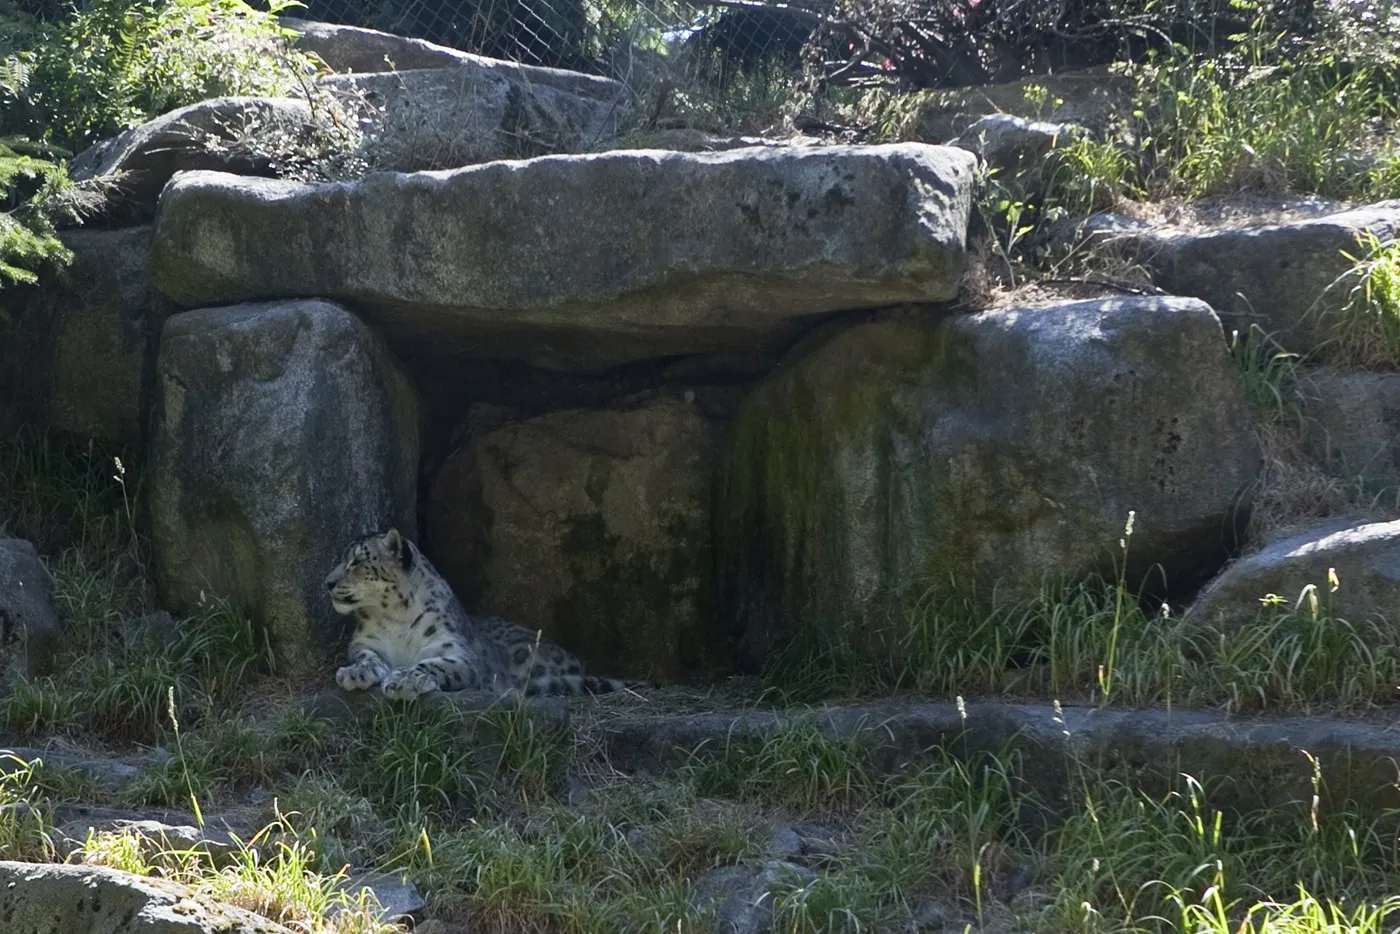 Leopards at Woodland Park Zoo in Seattle, Washington